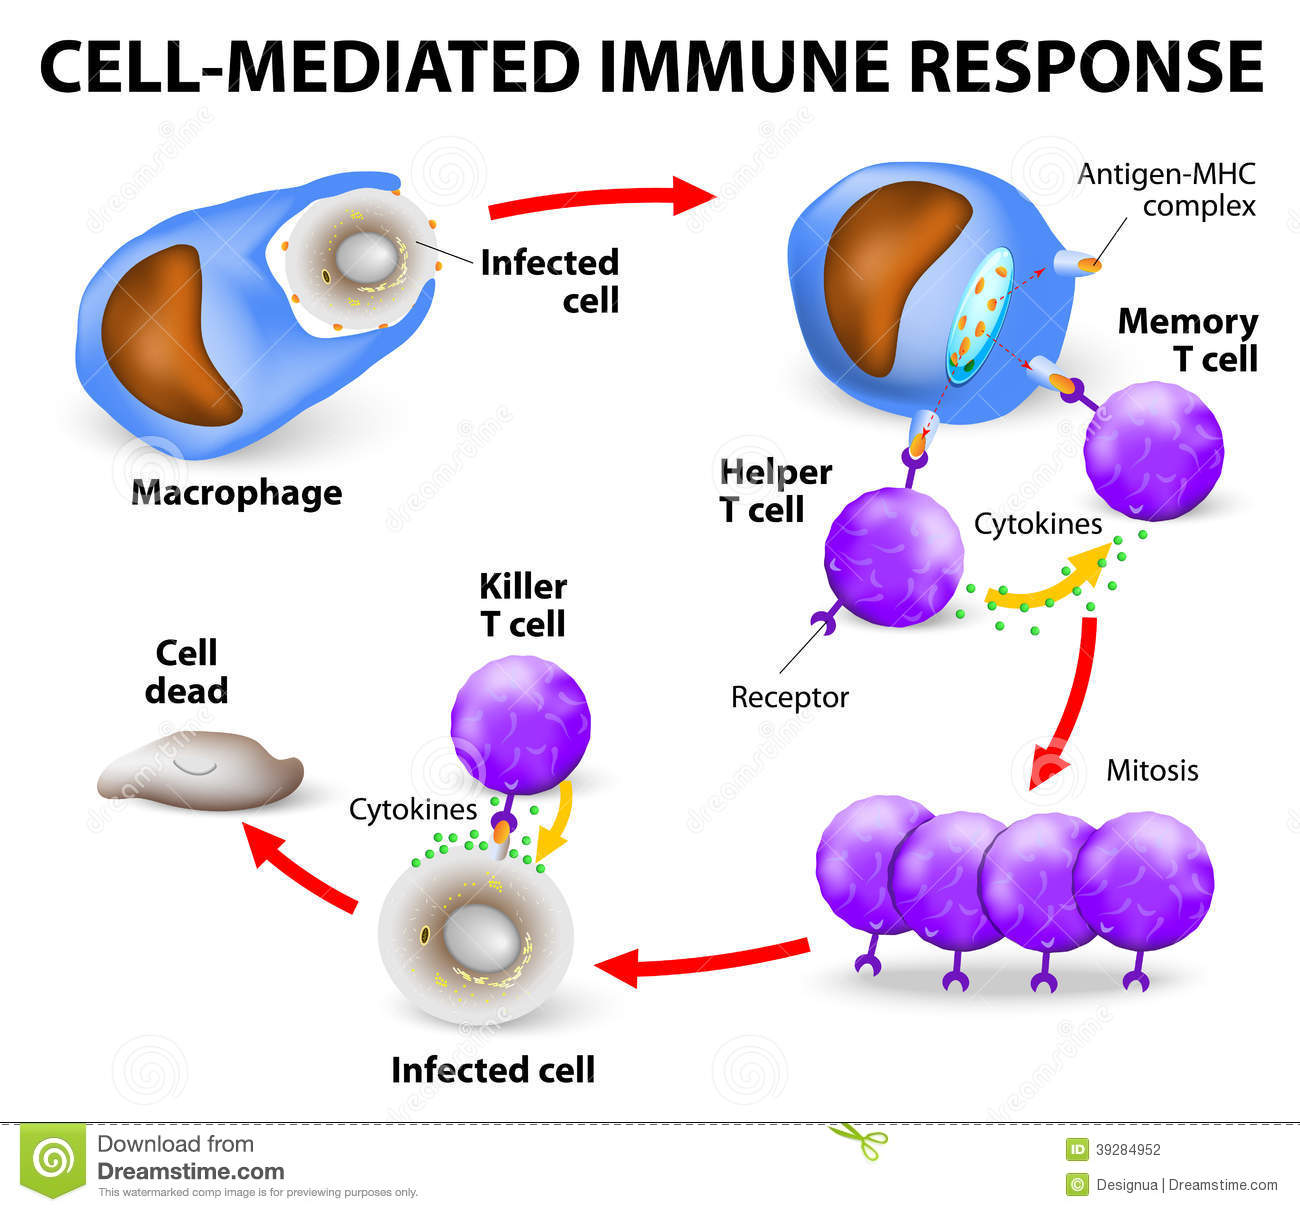 cell-mediated-immune-response-immunity-t-lymphocytes-do-not-secrete-antibodies-incorporates-activated-macrophages-natural-39284952